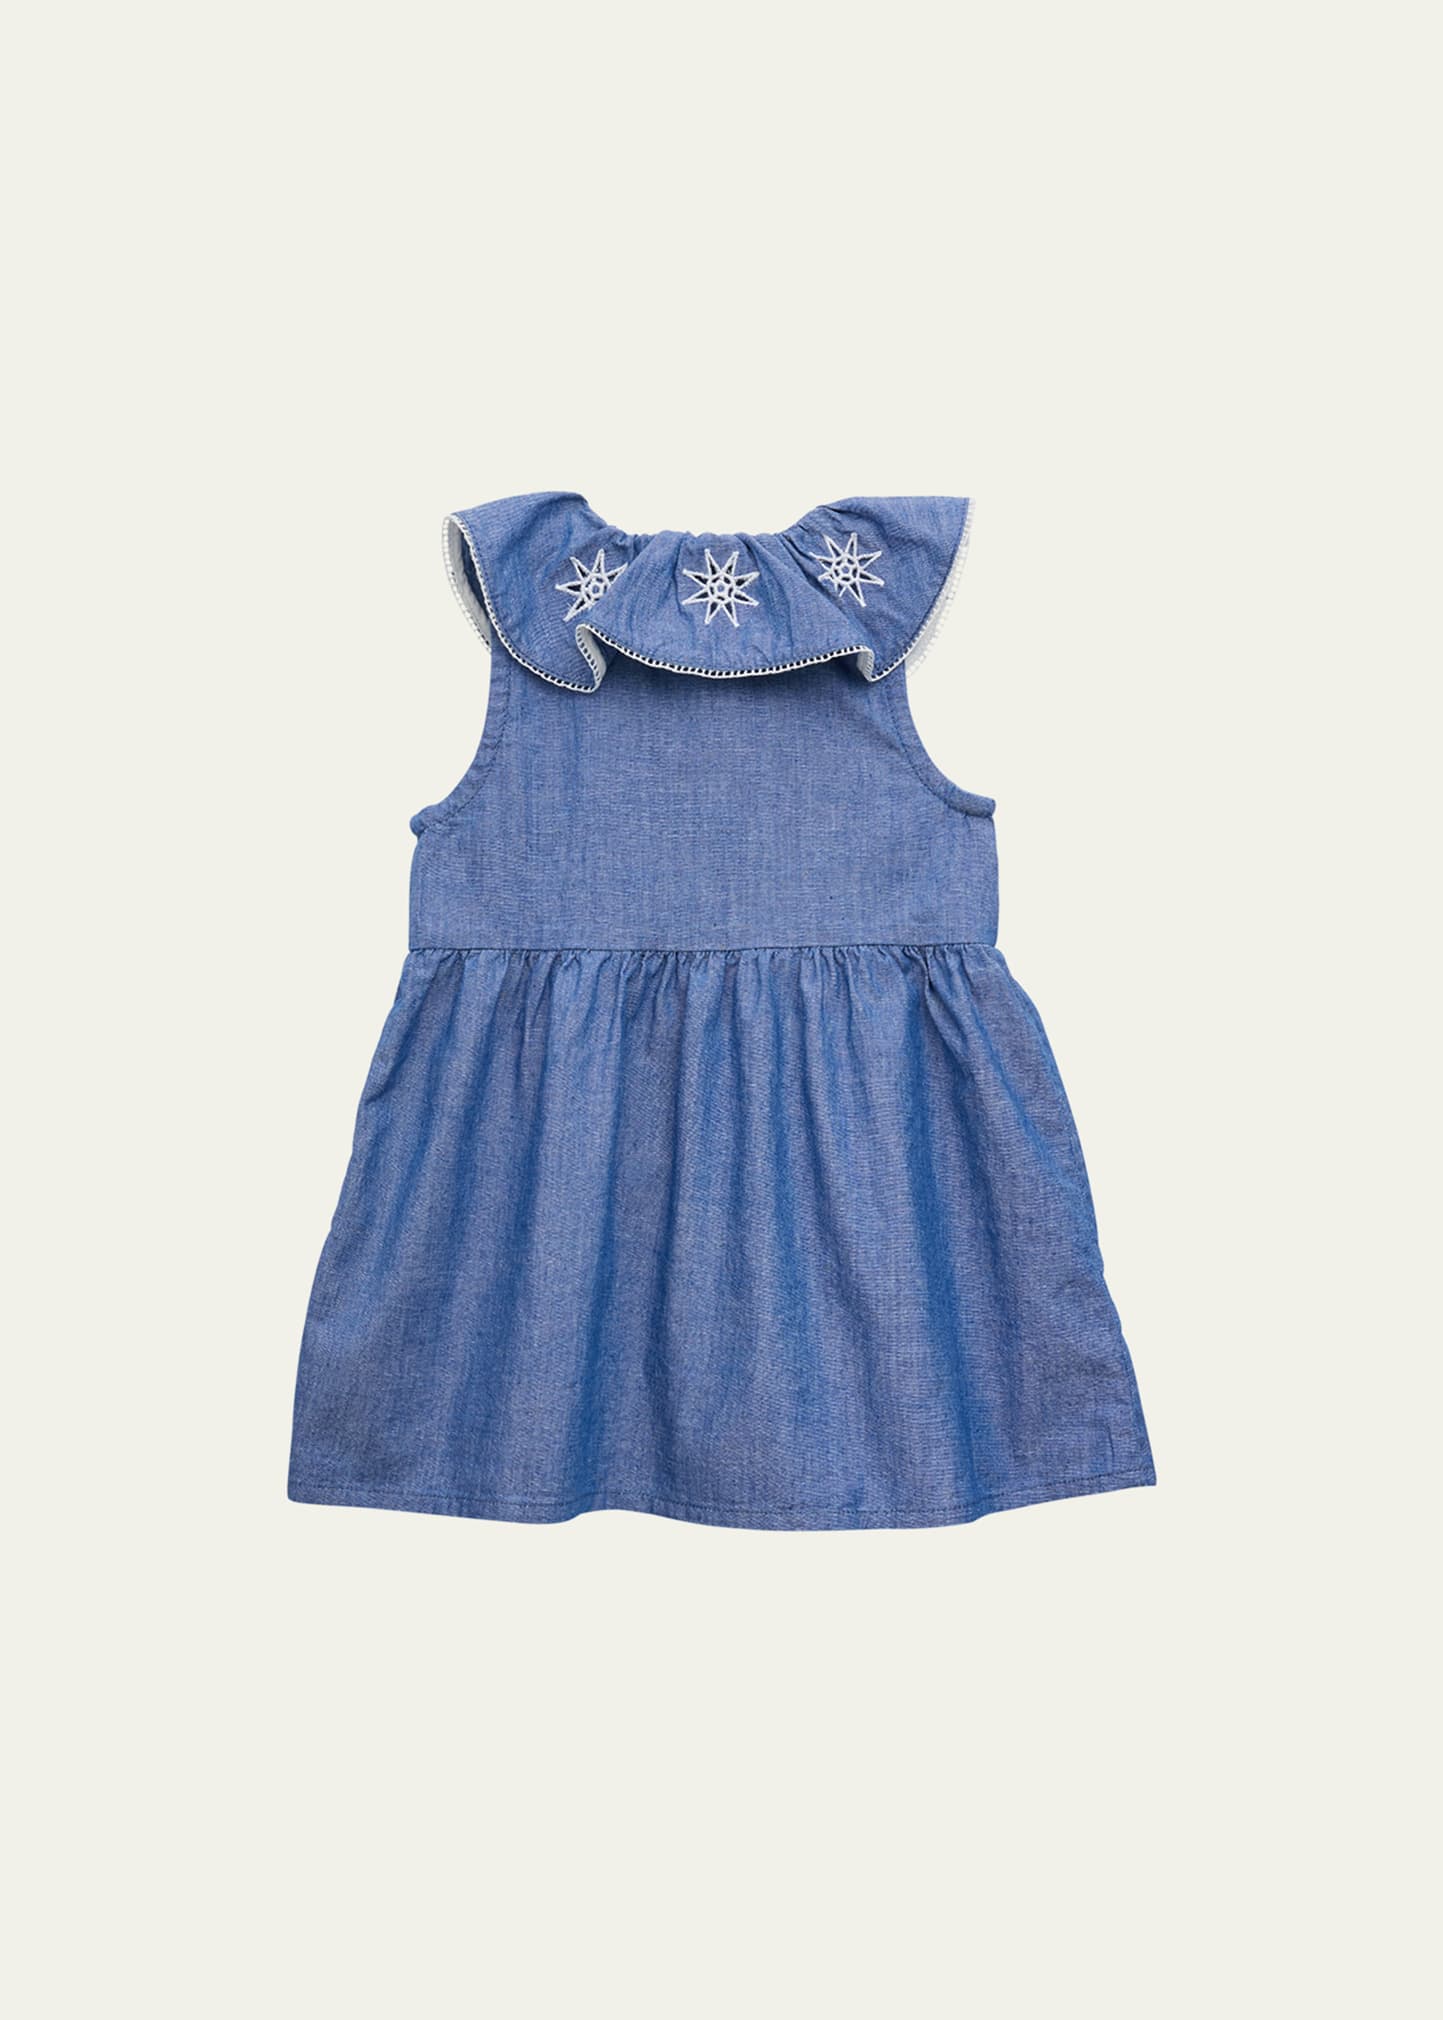 Chloé Kids' Girl's Embroidered Chambray Dress In Z77-chambray